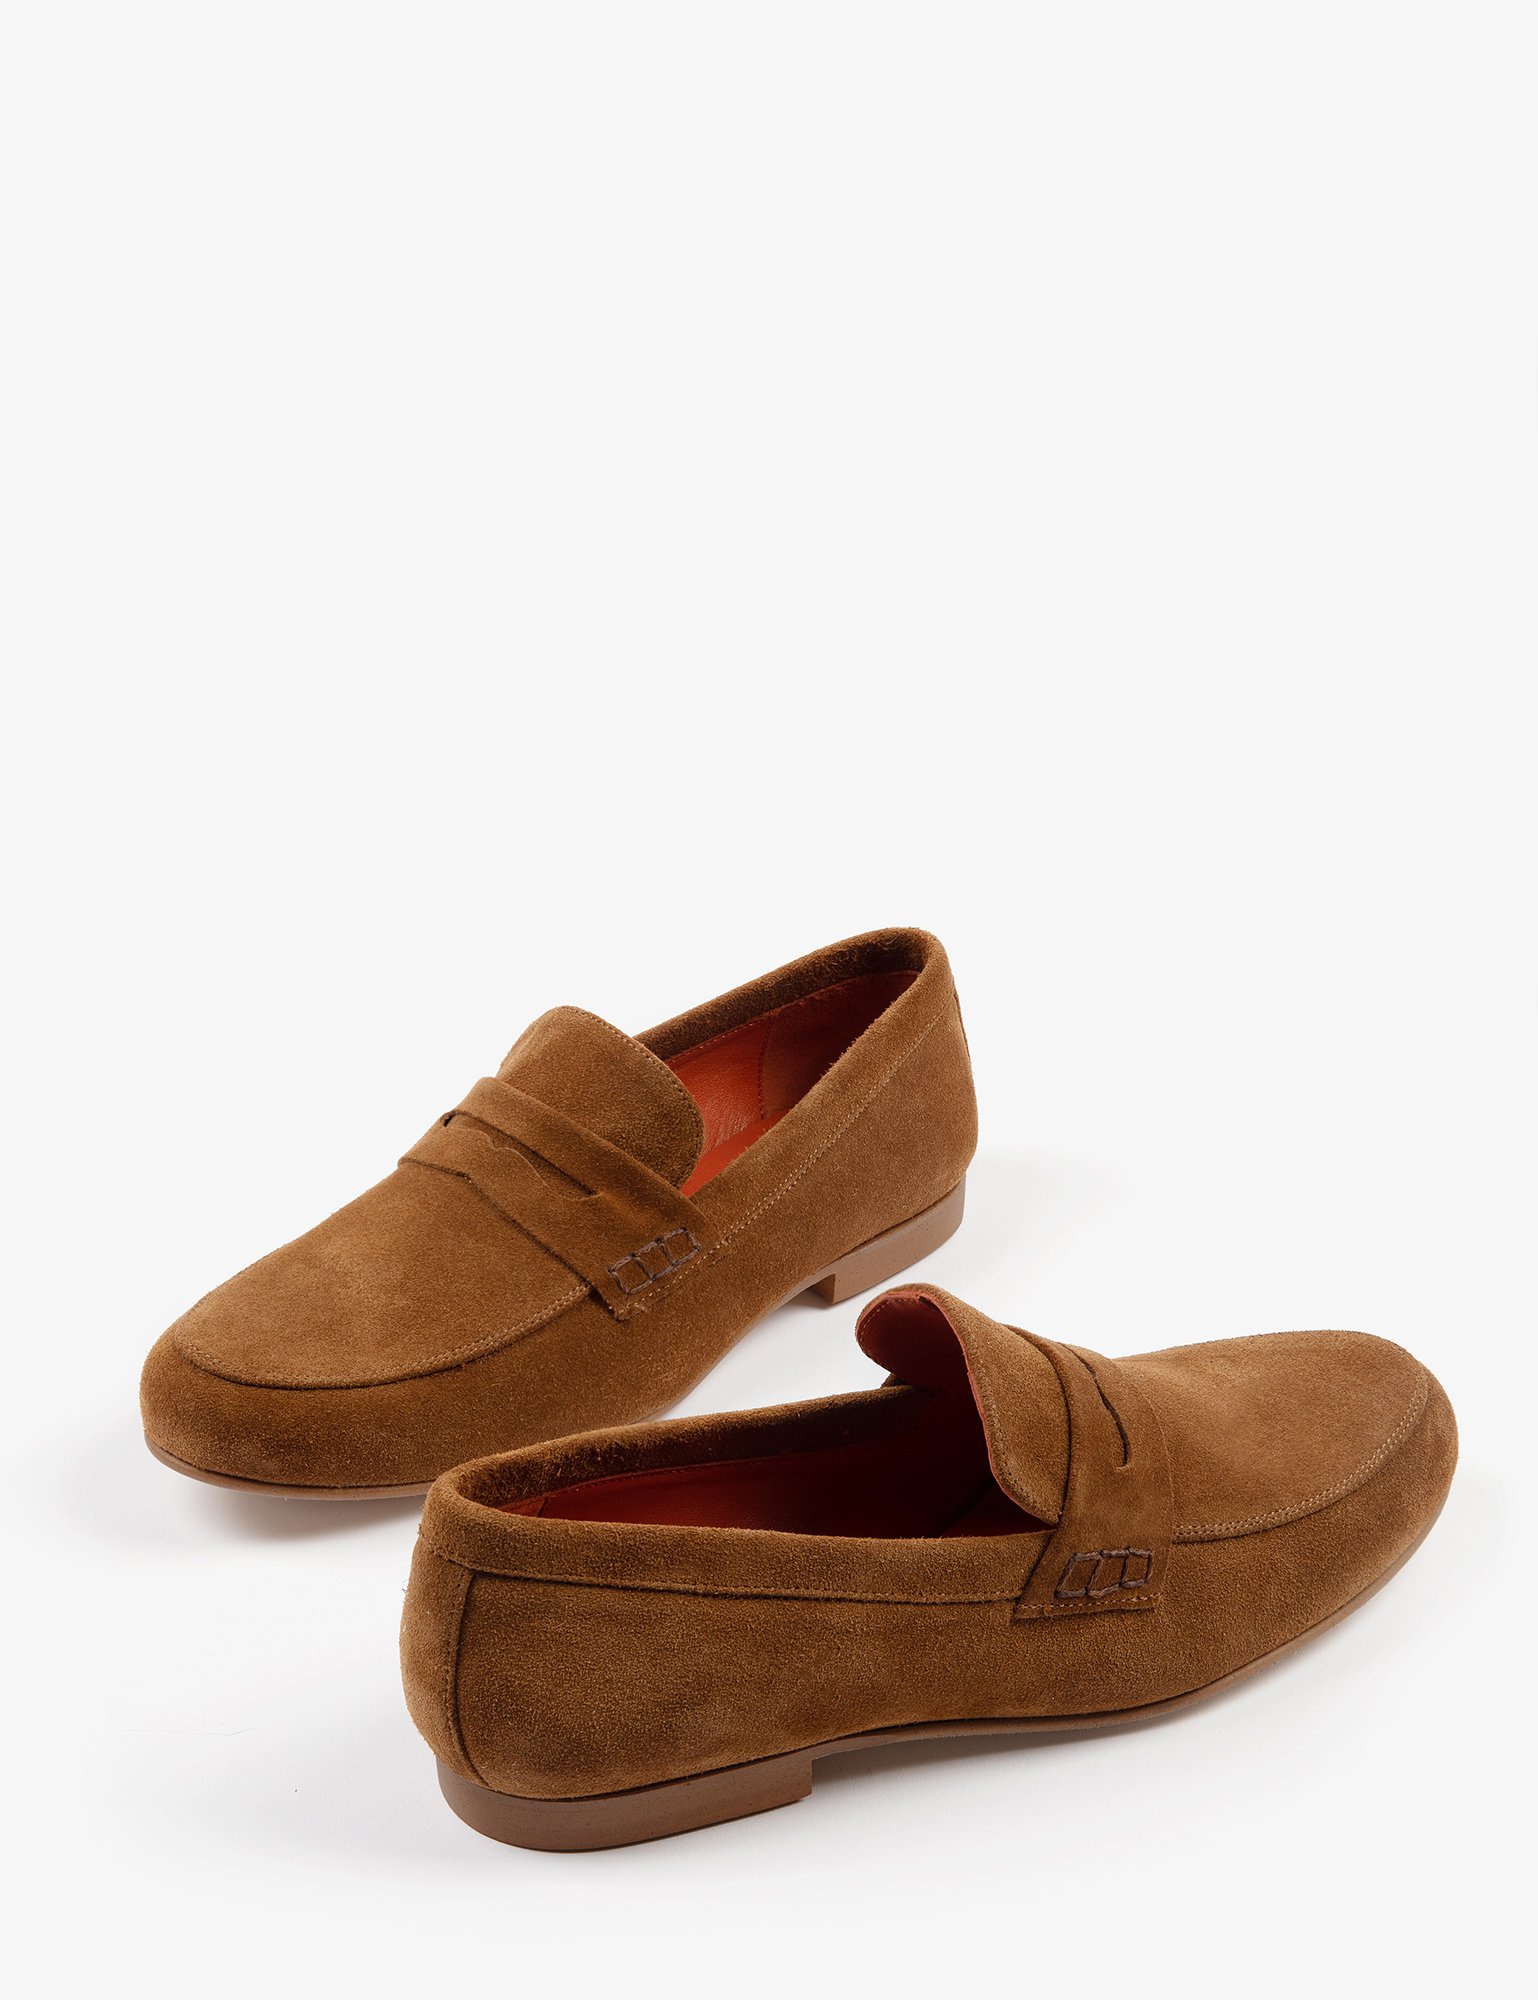 Bonnie Suede Loafer - Tan | Women's Shoes | Penelope Chilvers